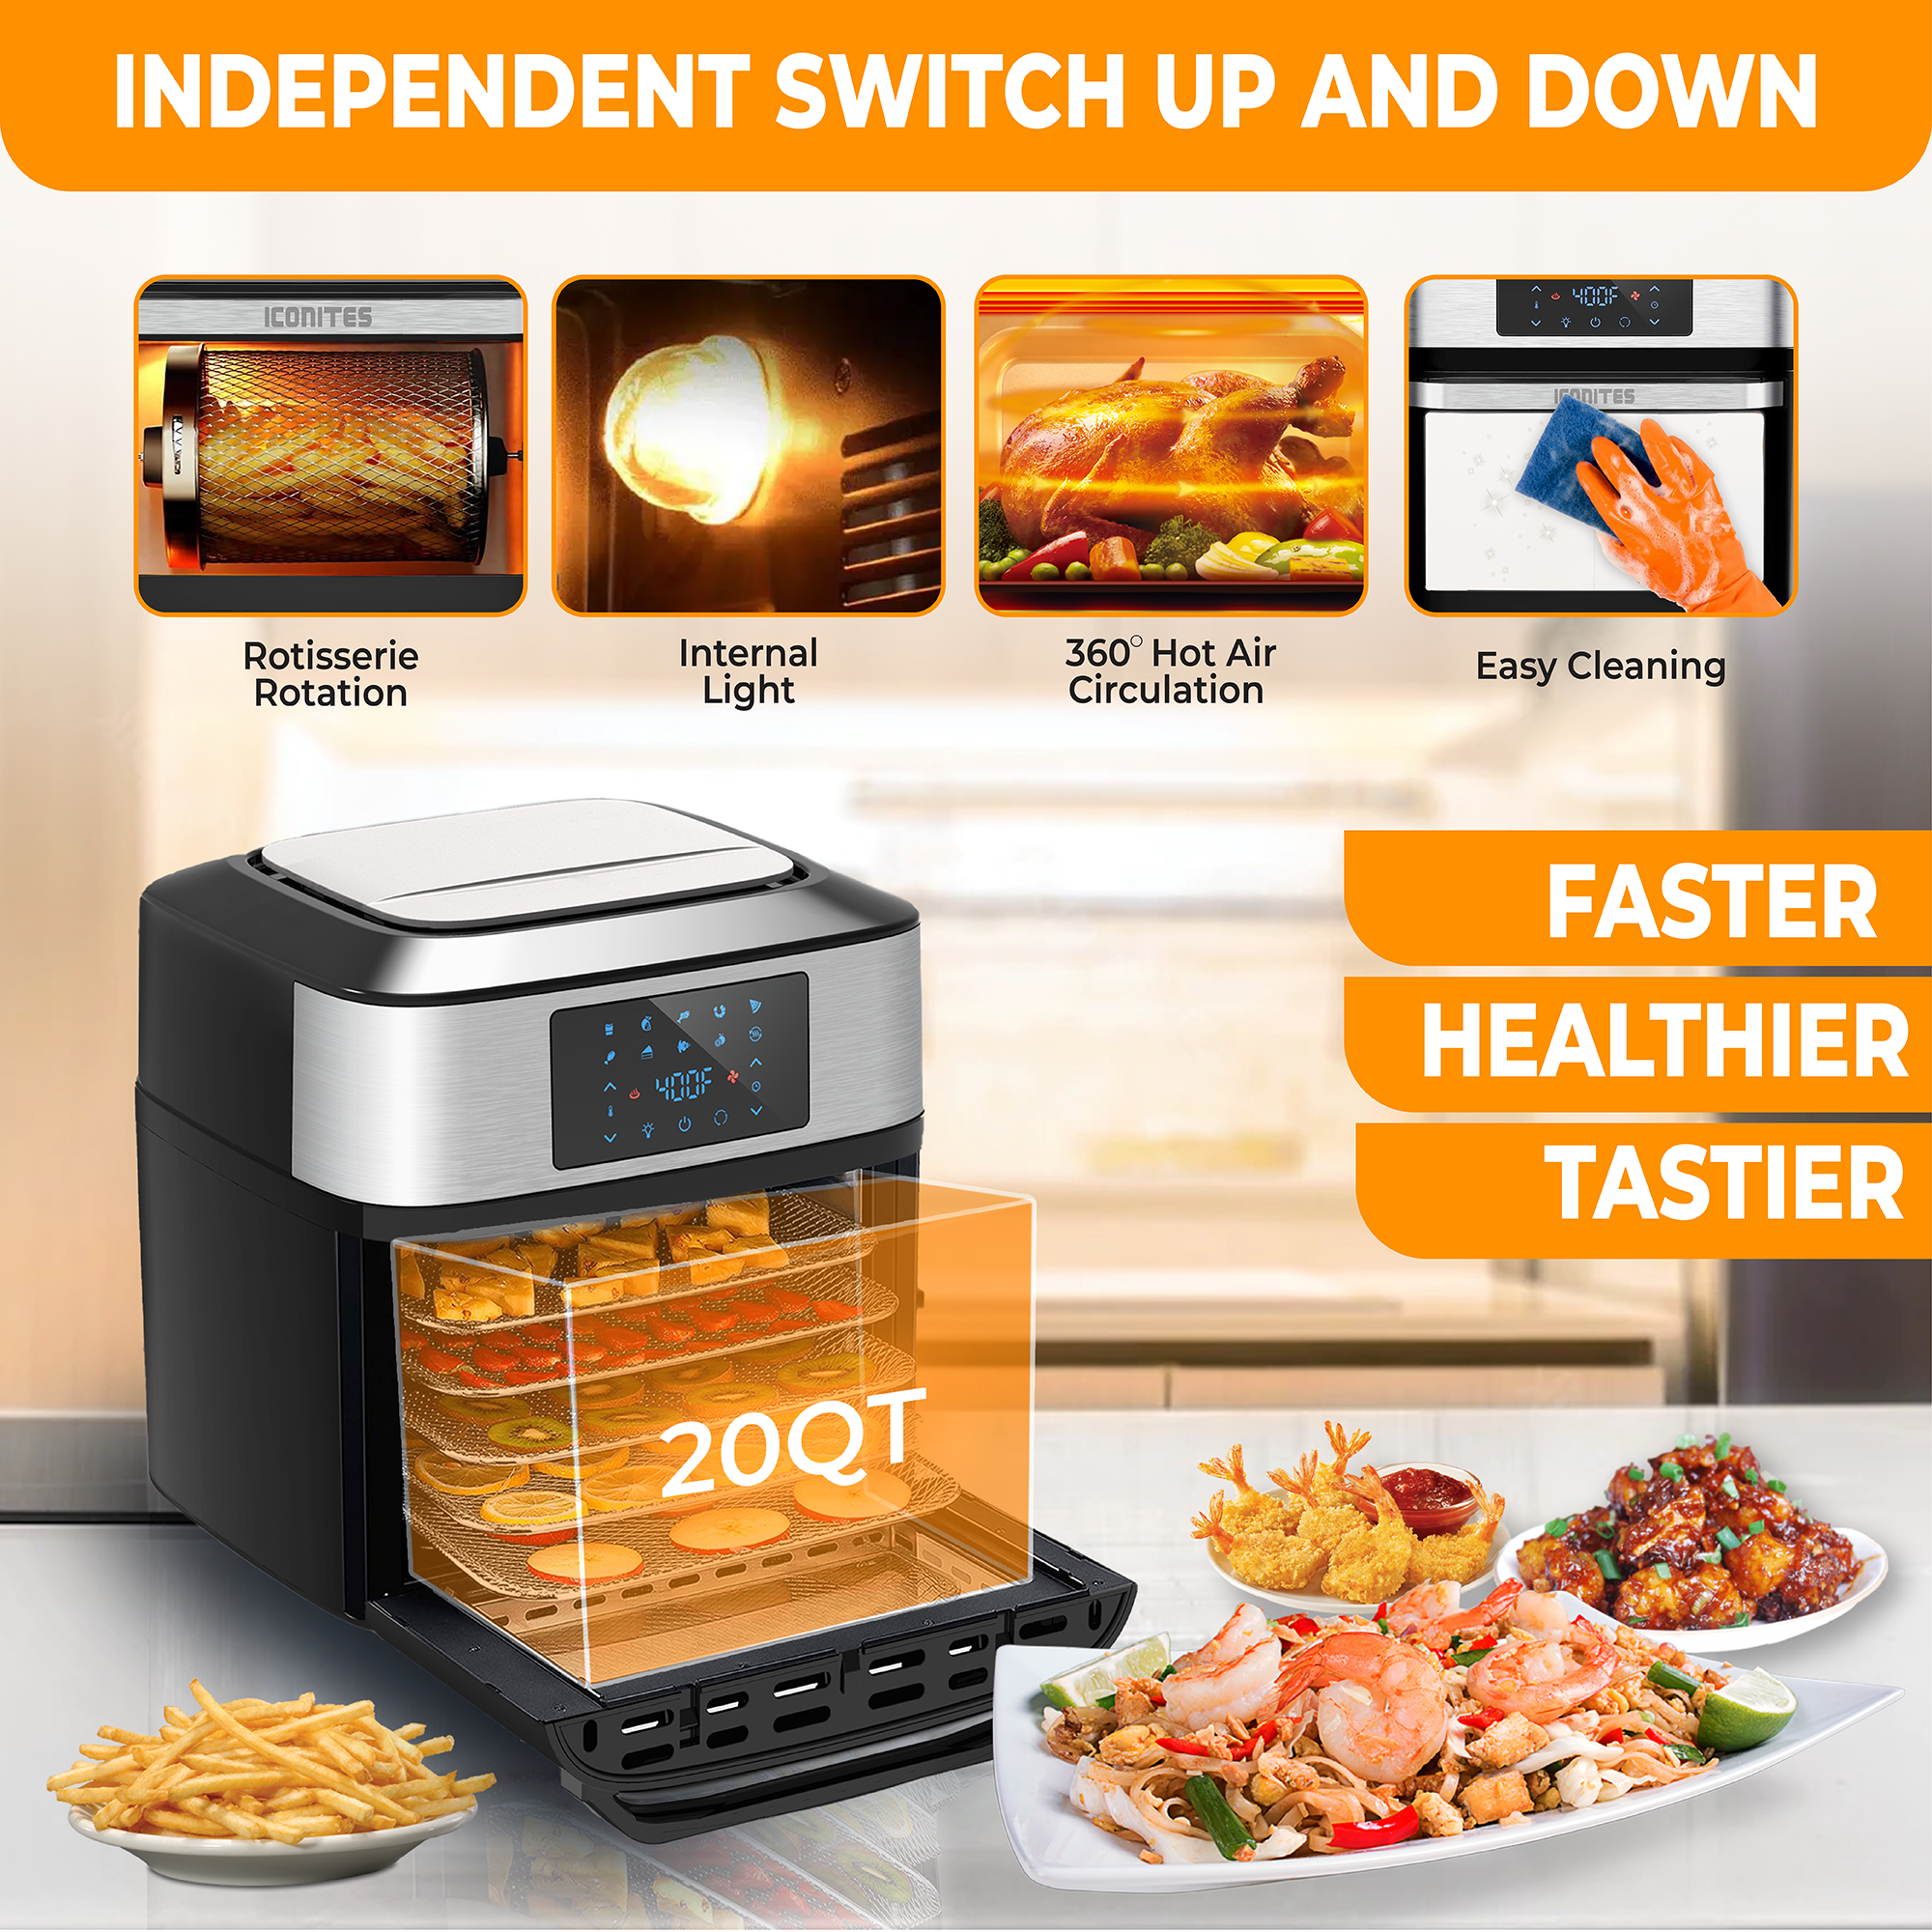 Iconites 20 Quart Air Fryer 10-in-1 Toaster Oven AO1202K with Rotisserie Black Airfryer on Sale 20 qt - image 5 of 9